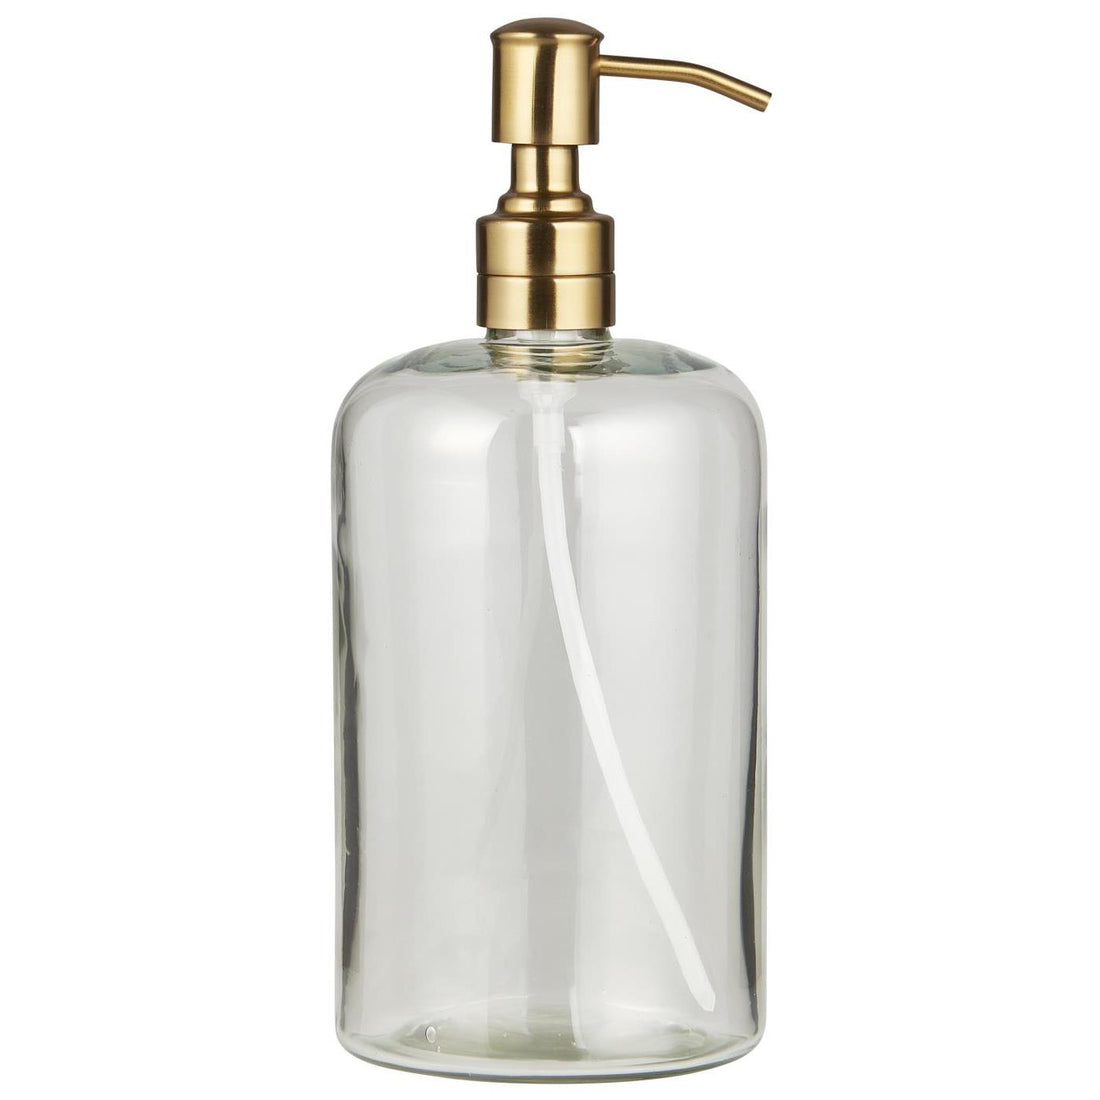 GLASS DISPENSER WITH BRASS COLOURED STAINLESS PUMP